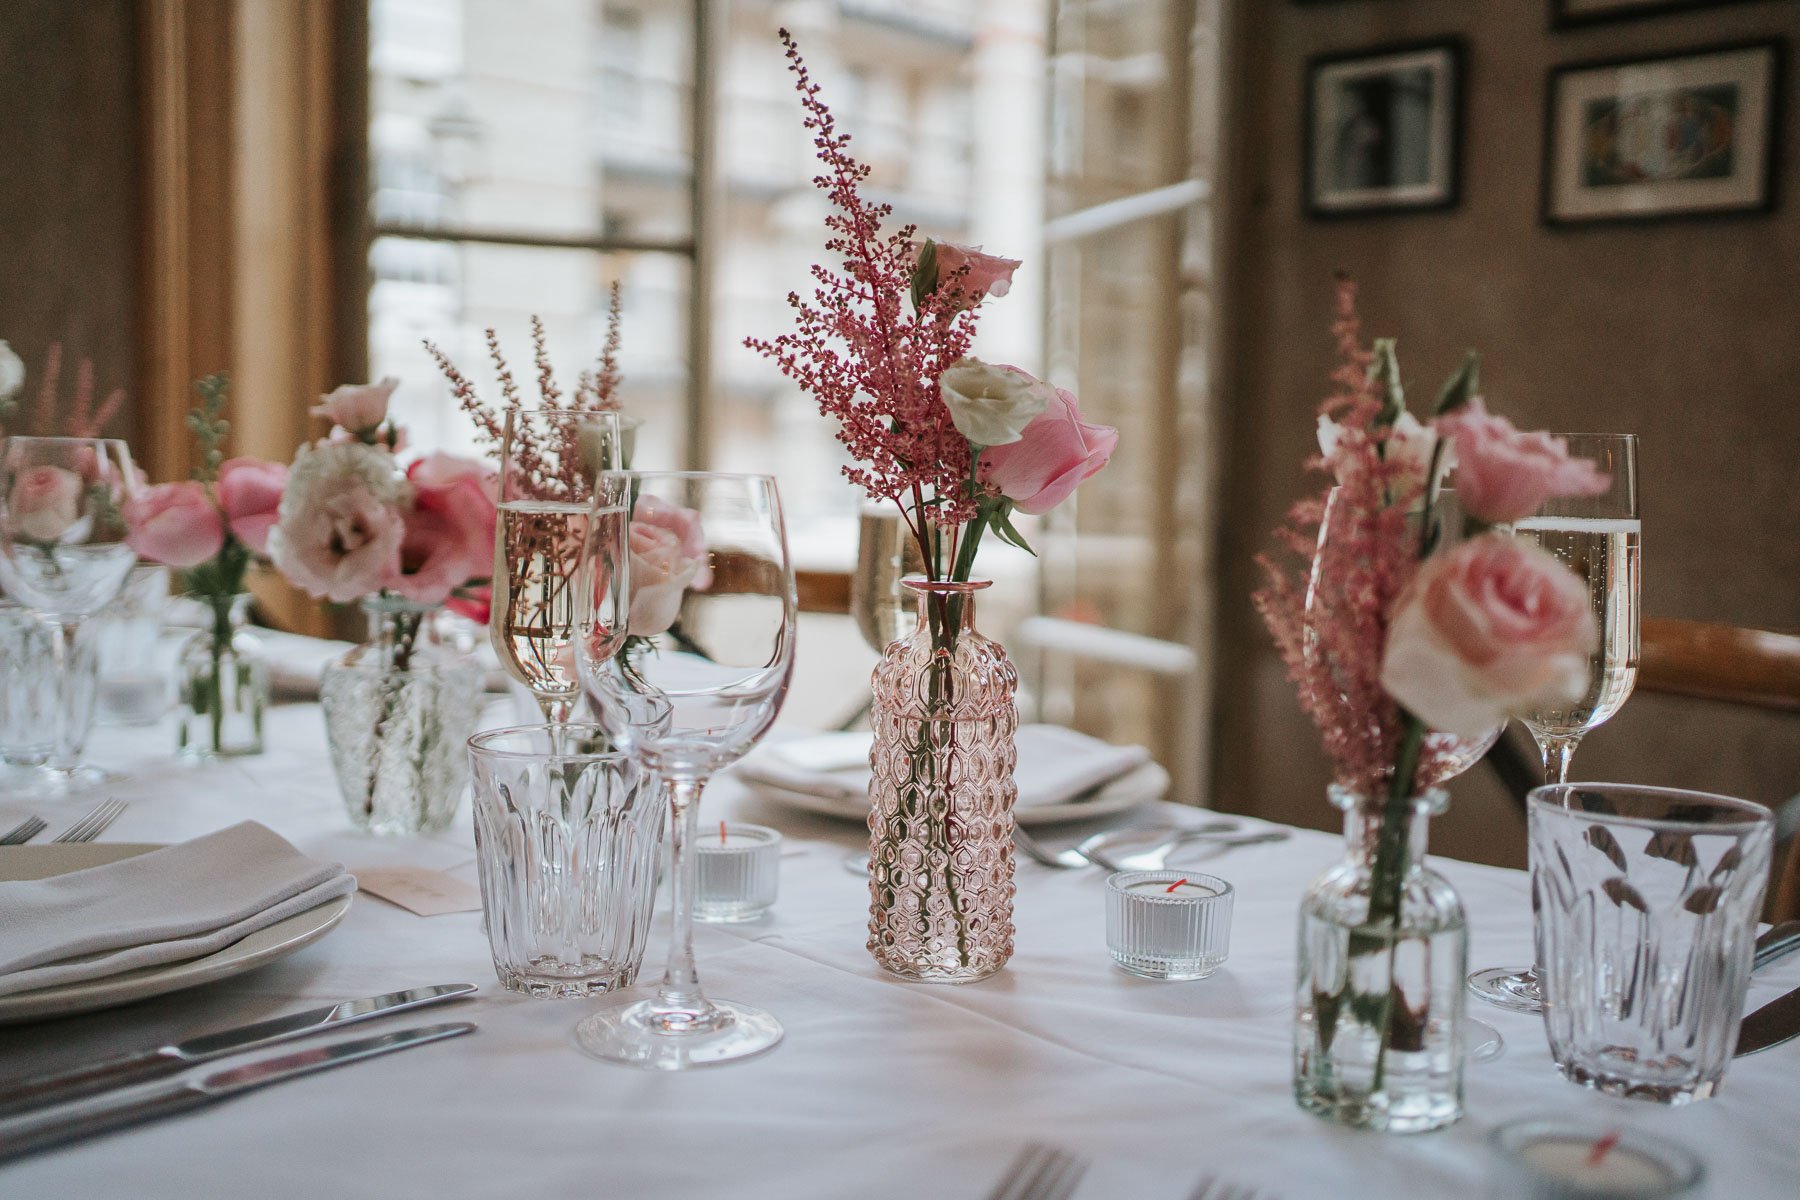  Small pink roses and other flowers in vases on table in the Main Dining Room of  The Orange  in Belgravia. 